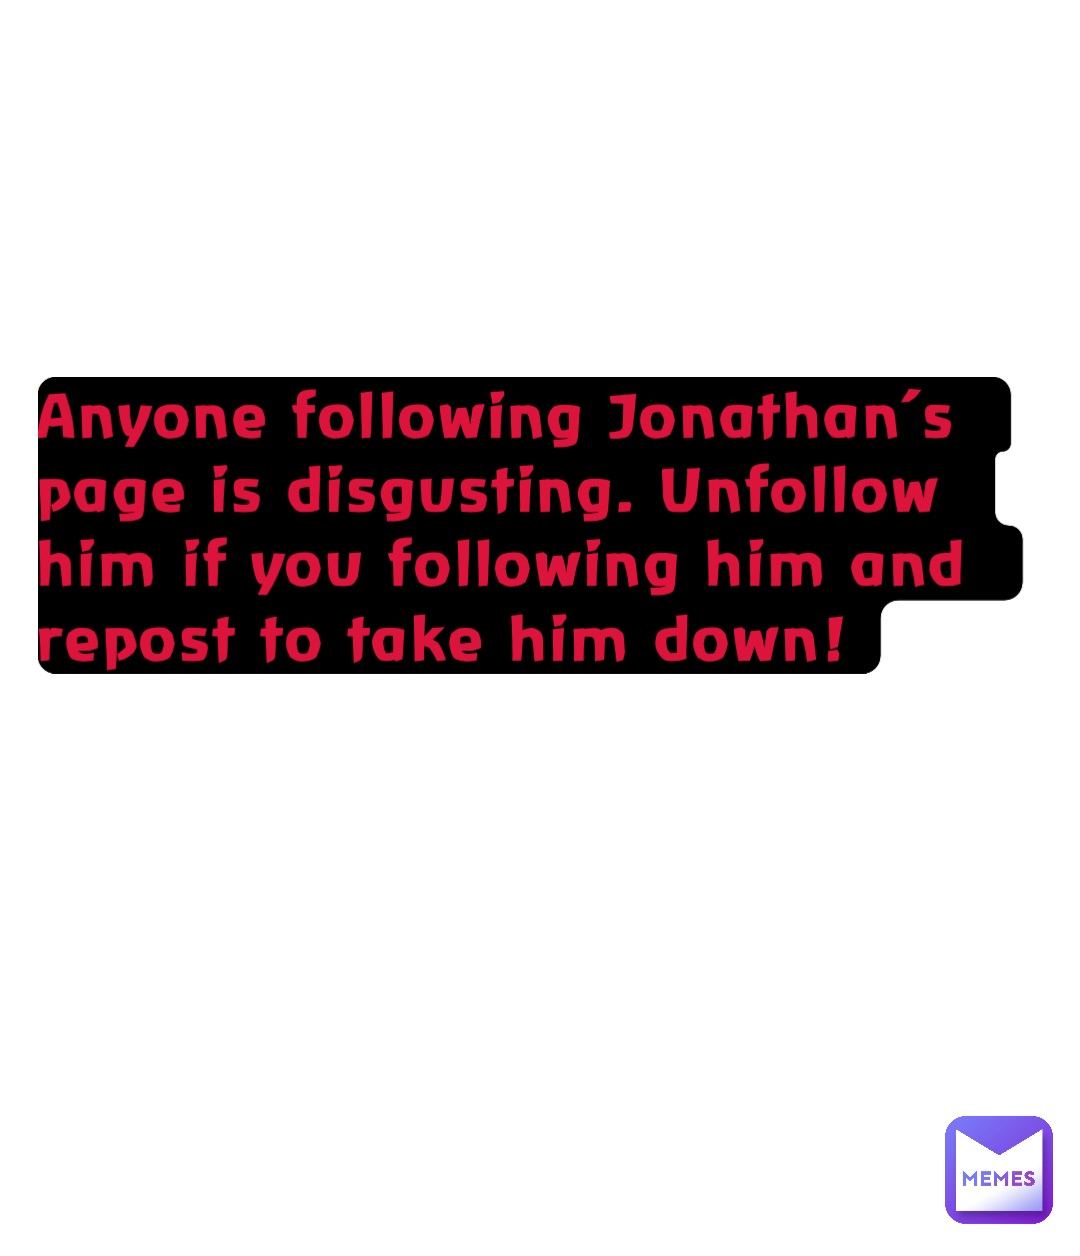 Anyone following Jonathan’s page is disgusting. Unfollow him if you following him and repost to take him down!